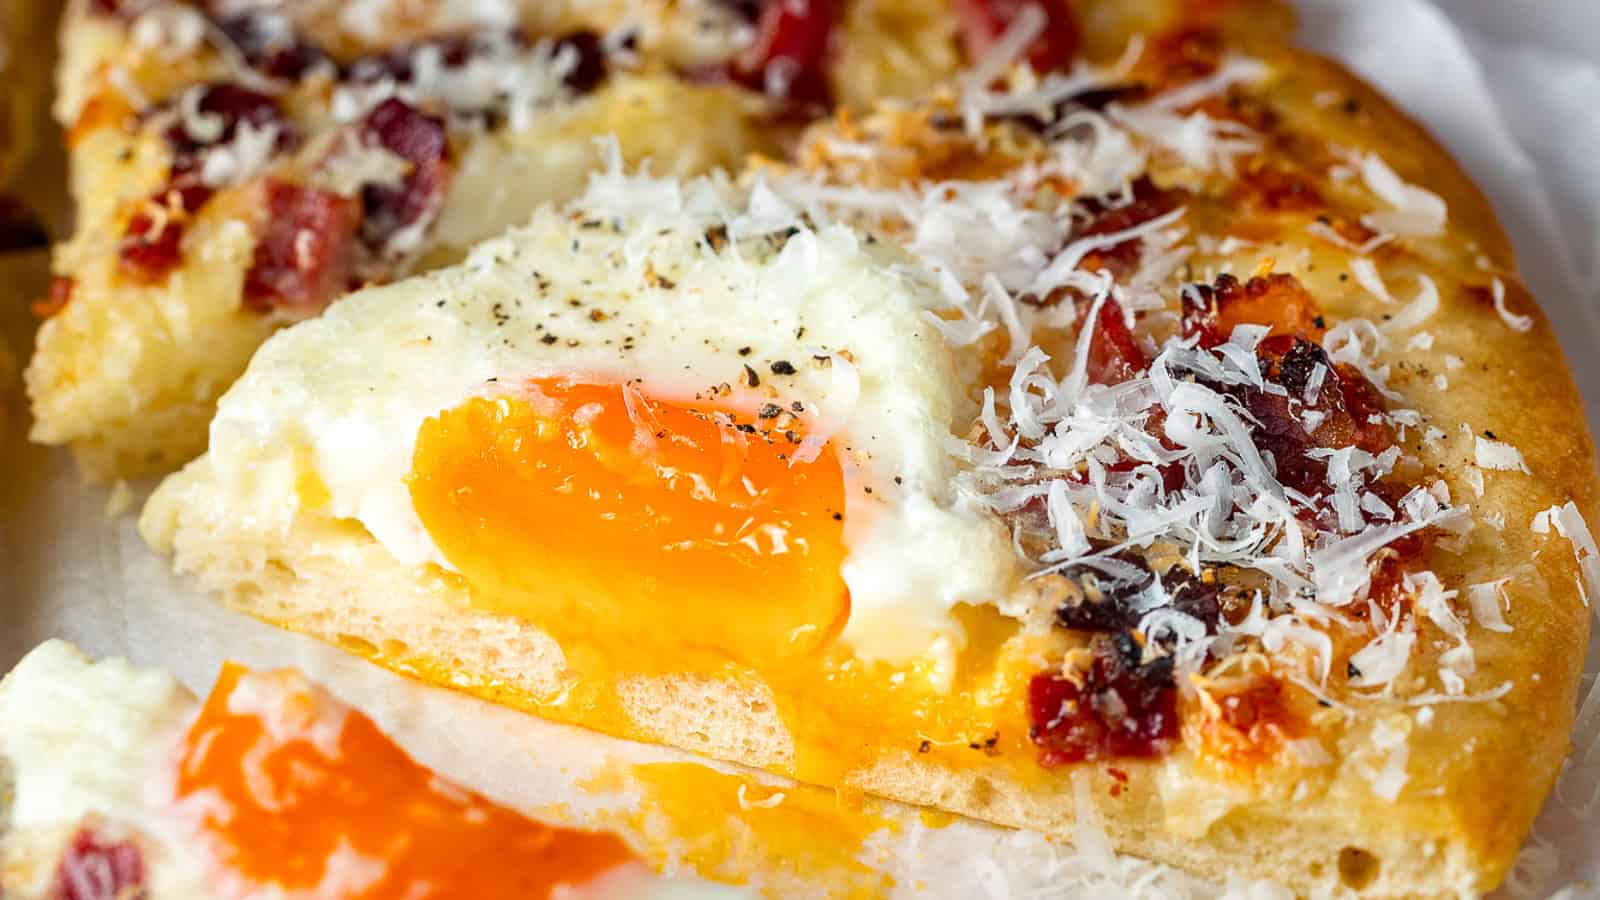 A close-up of a pizza slice topped with a runny egg yolk, grated cheese, bacon bits, and black pepper.